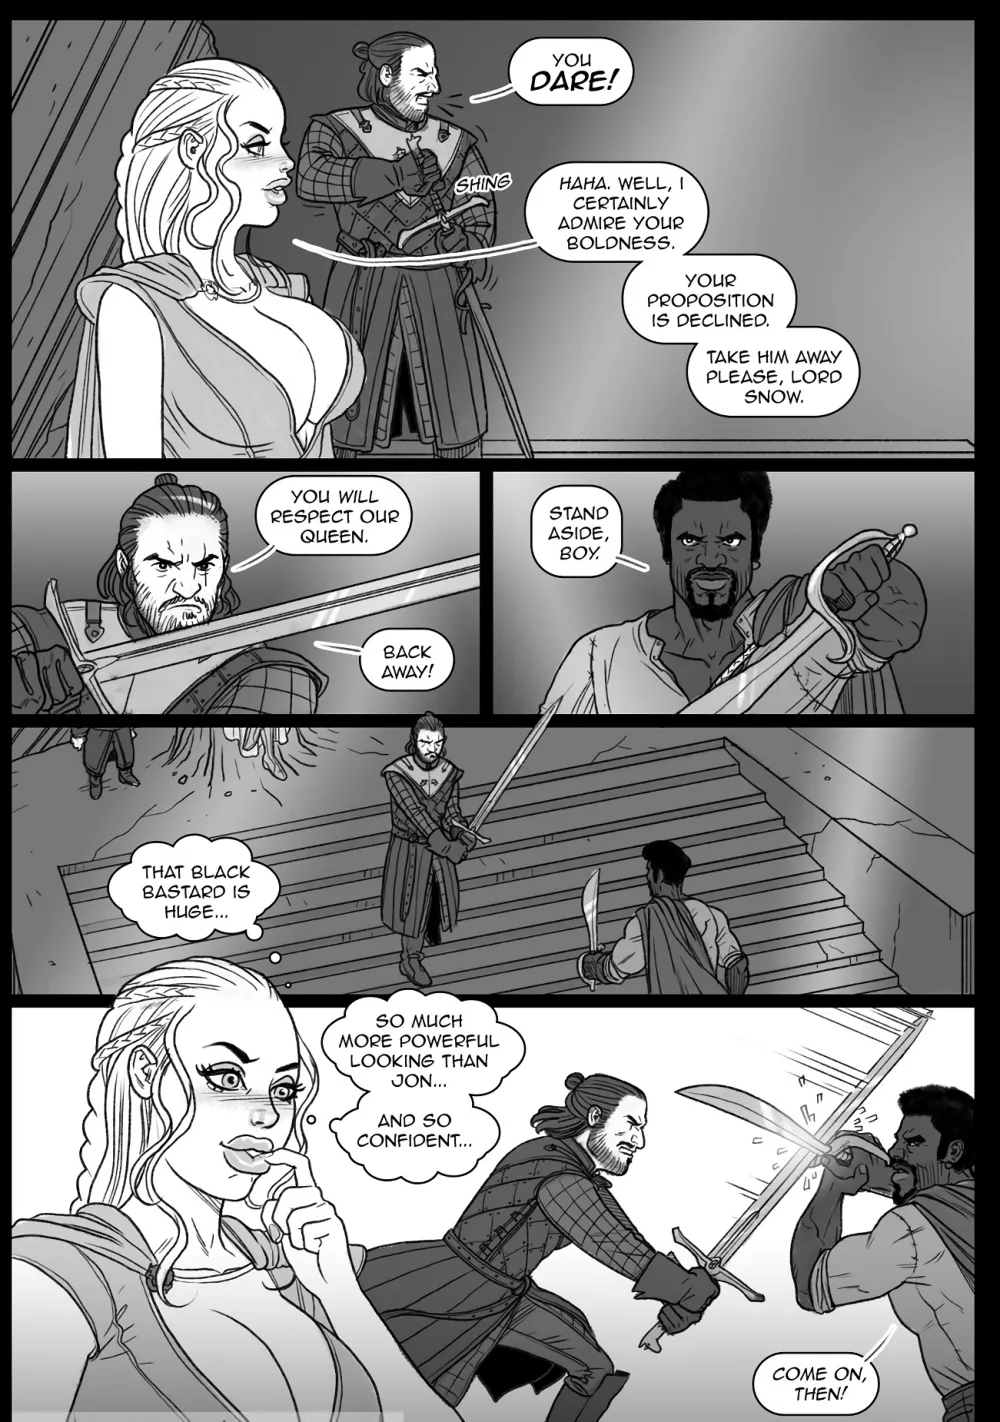 Game of Thrones- Blacked - Page 3